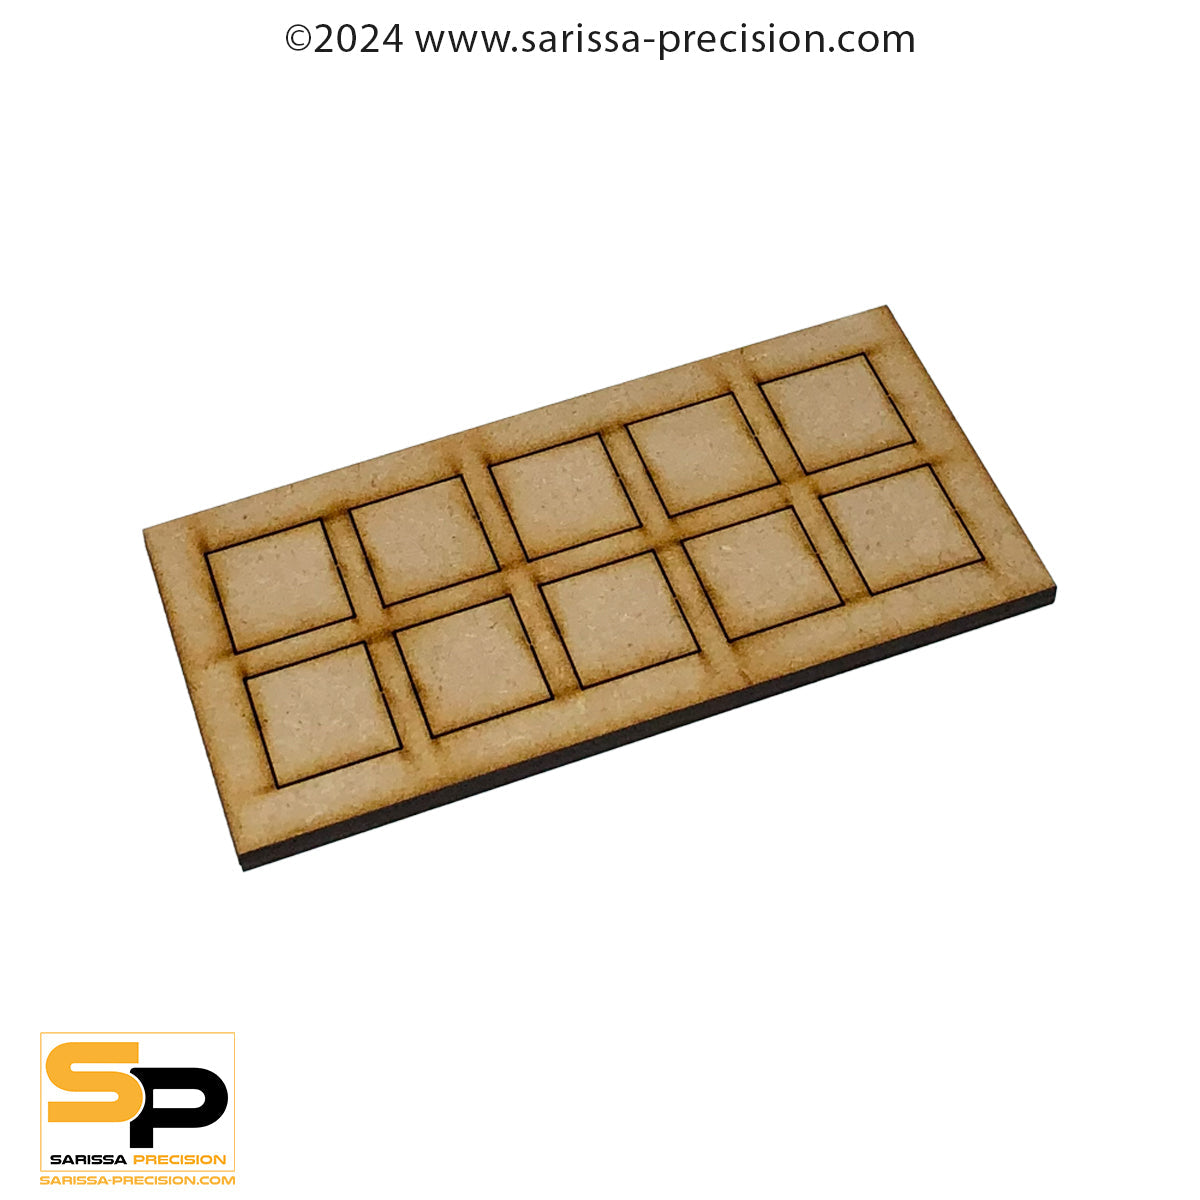 6x6 25x25mm Conversion Tray for 20x20mm bases